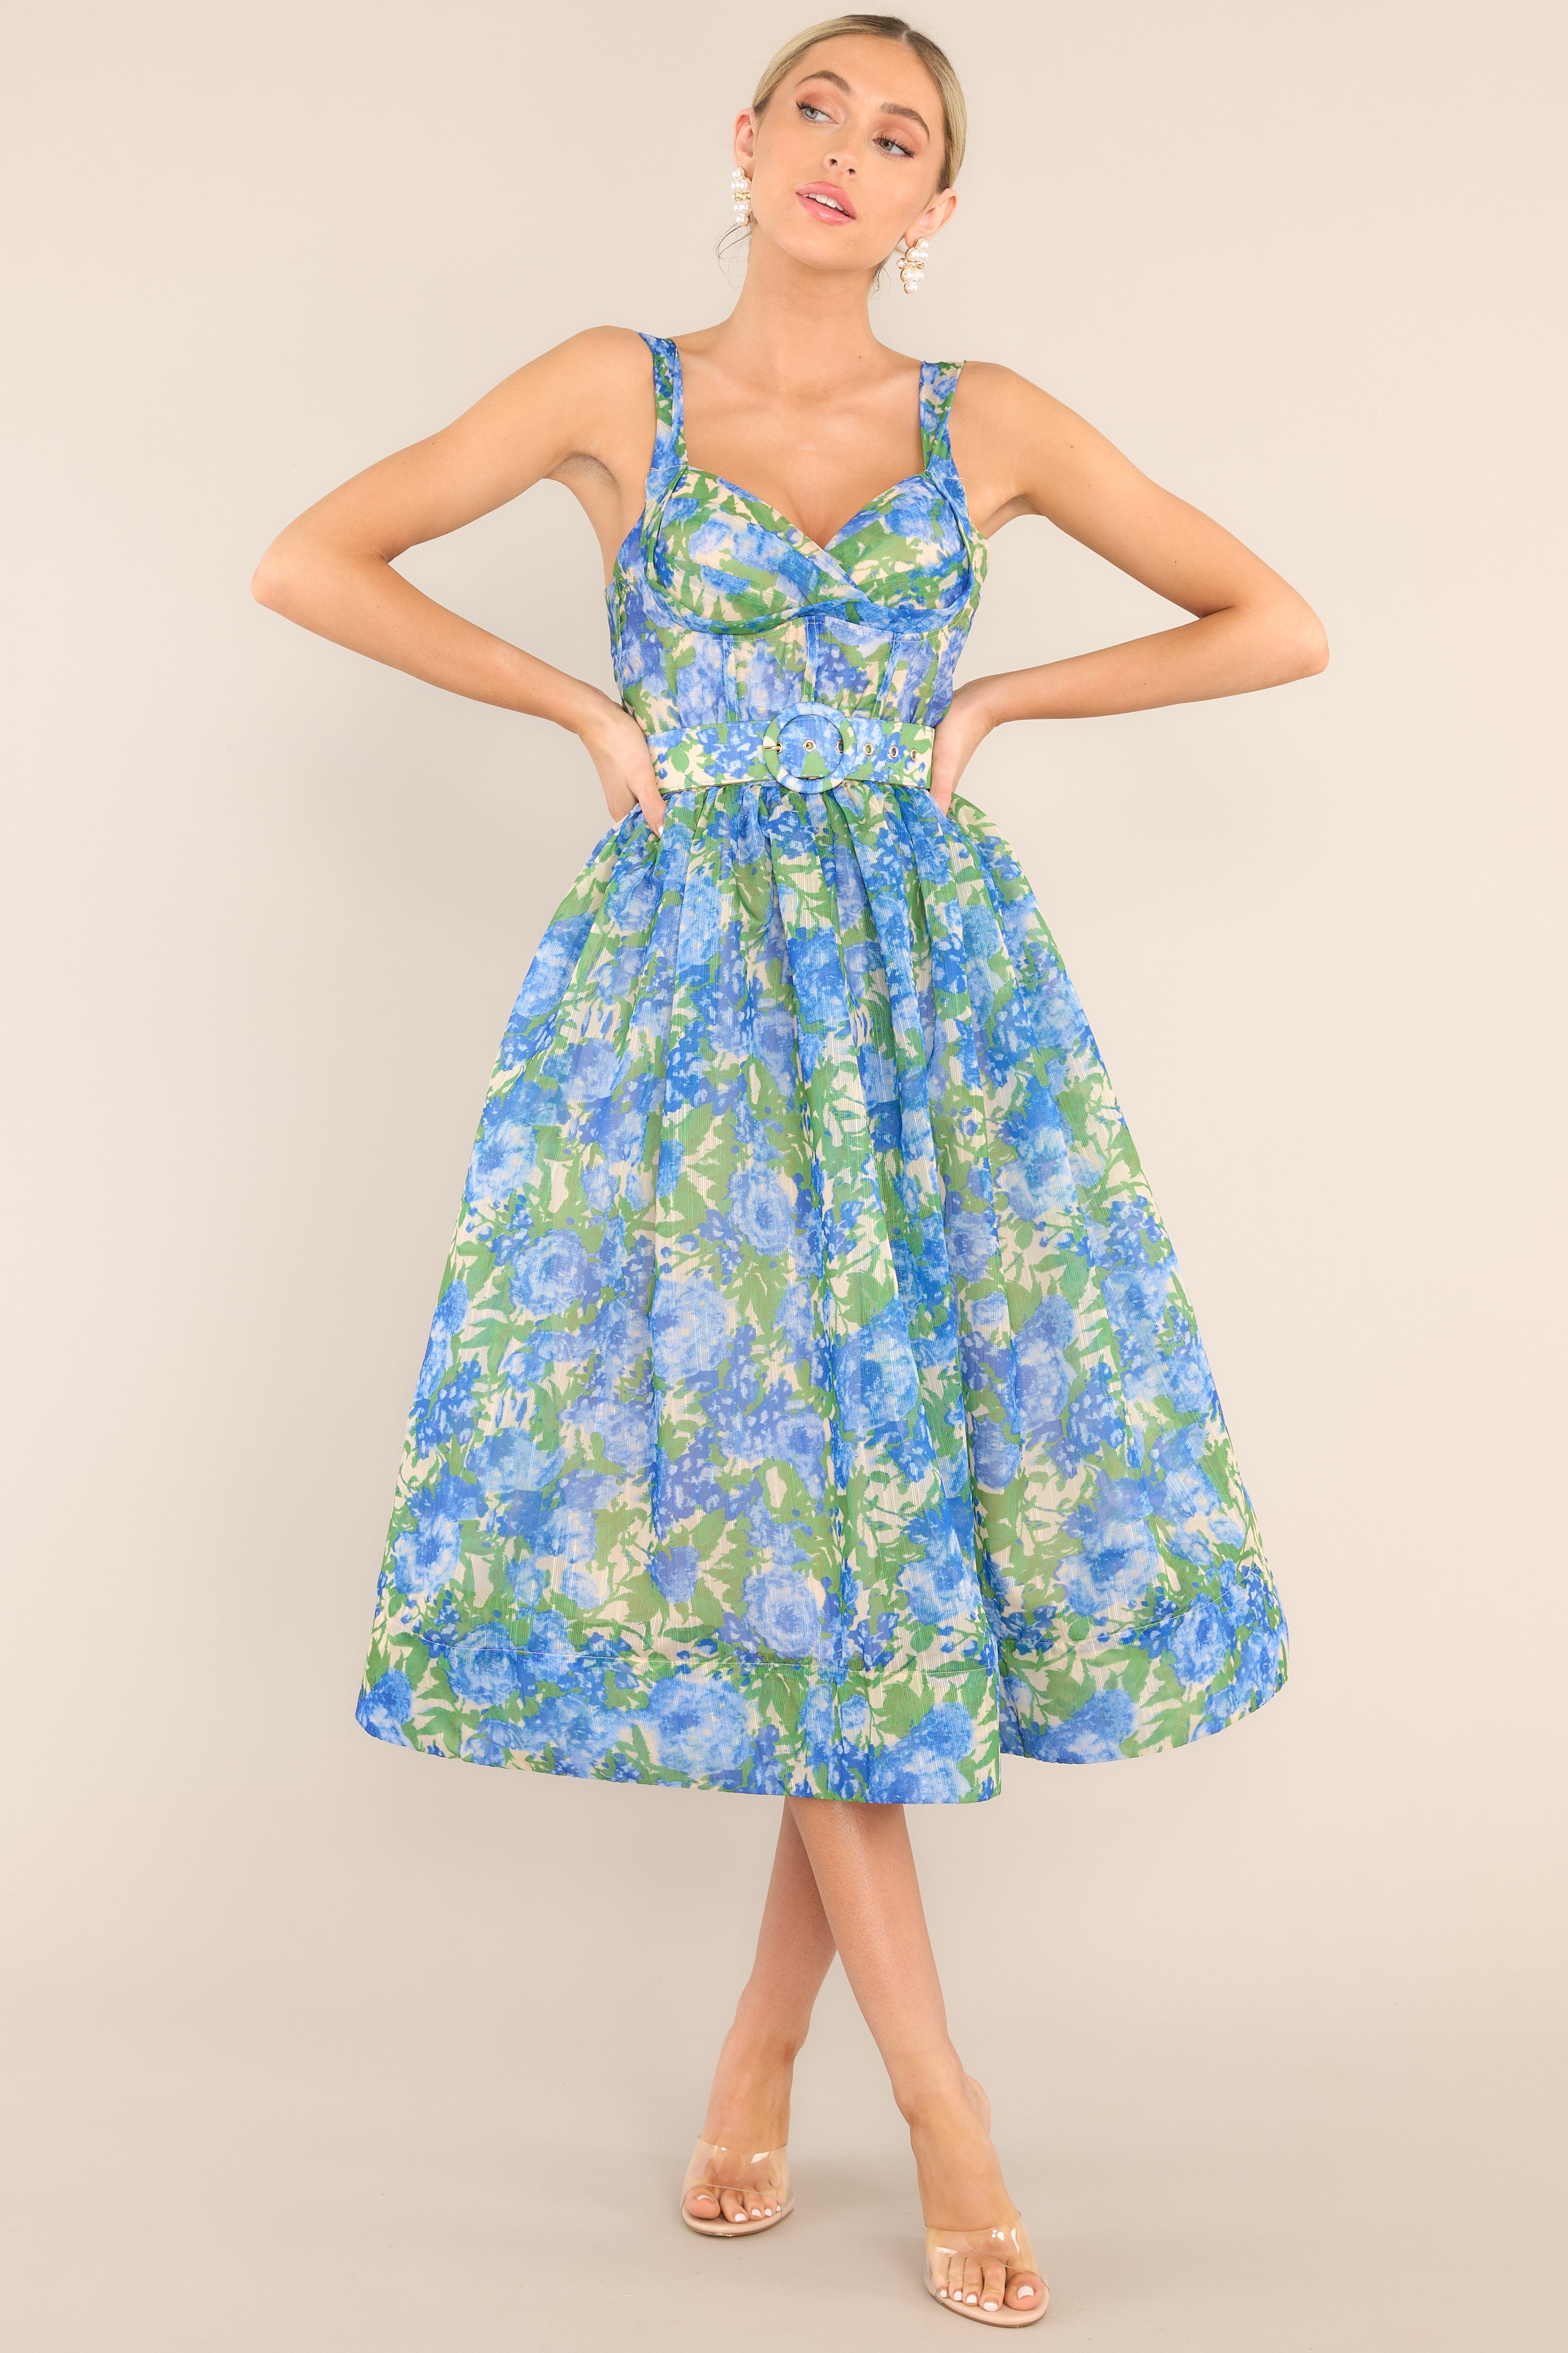 Full body view of this dress that features a sweetheart neckline, adjustable straps, a zipper down the back with a smocked insert, a padded bust, boning in the bodice, belt loops, an adjustable belt, and a thick hemline.